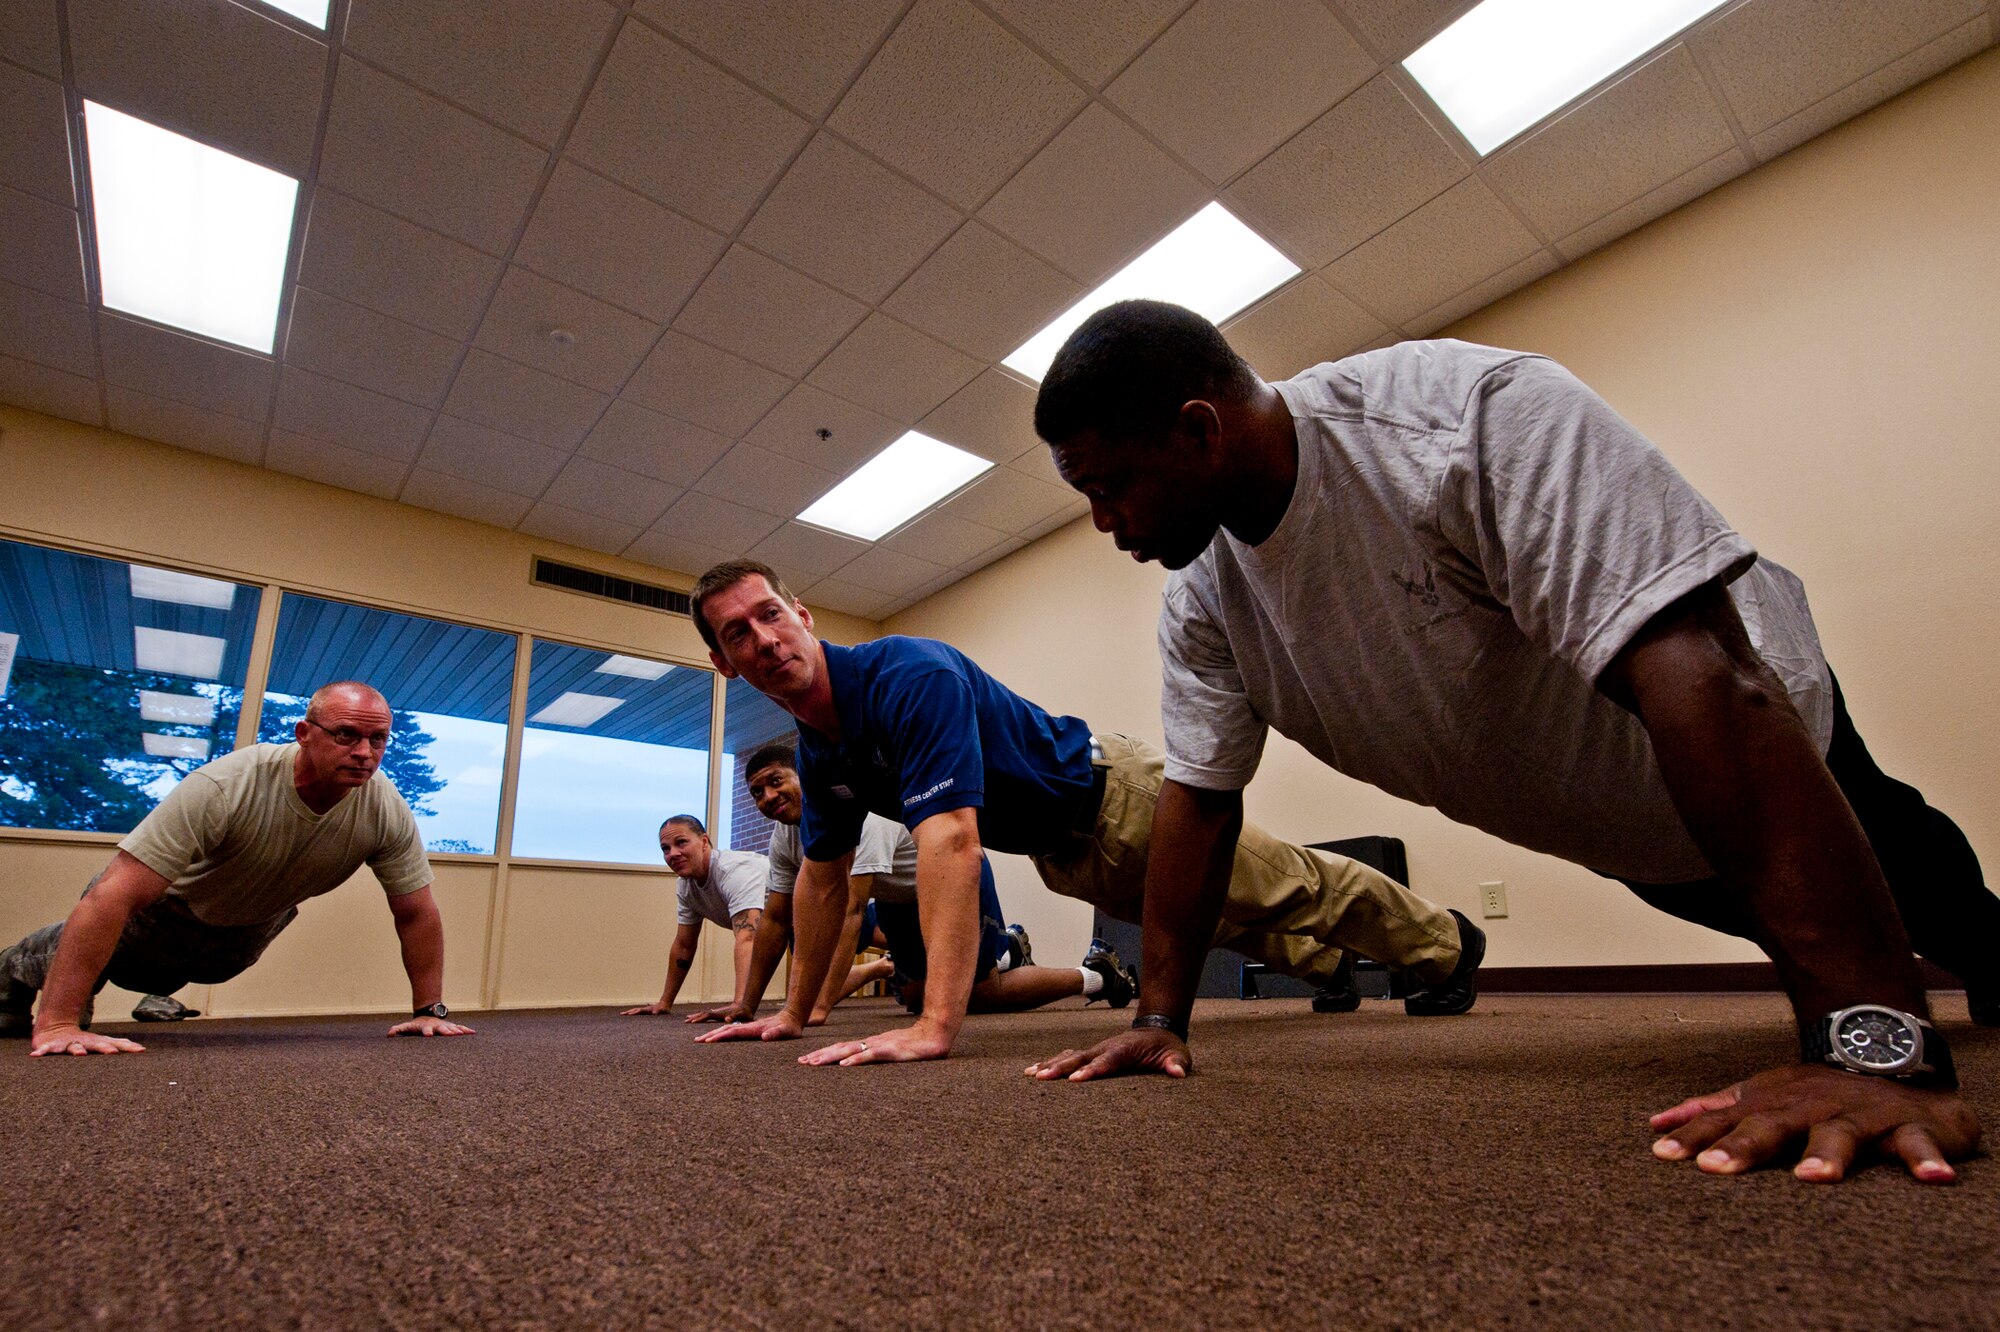 Chief Master Sgt. Brian Randolph, 46th Test Wing command chief, and Ben Gleason, a 96th Air Base Wing fitness program liaison, prepare to do pushups with Herschel Walker March 22 at Eglin Air Force Base, Fla.  Walker spoke with Airmen prior to their physical training test about his own no-weights workout routine of more than 1,500 pushups a day.  He also spoke twice to large crowds of Team Eglin members about his life, career and the emotional and mental struggles he encountered throughout.  His message was about resiliency and the importance of asking for help. (U.S. Air Force photo/Samuel King Jr.)